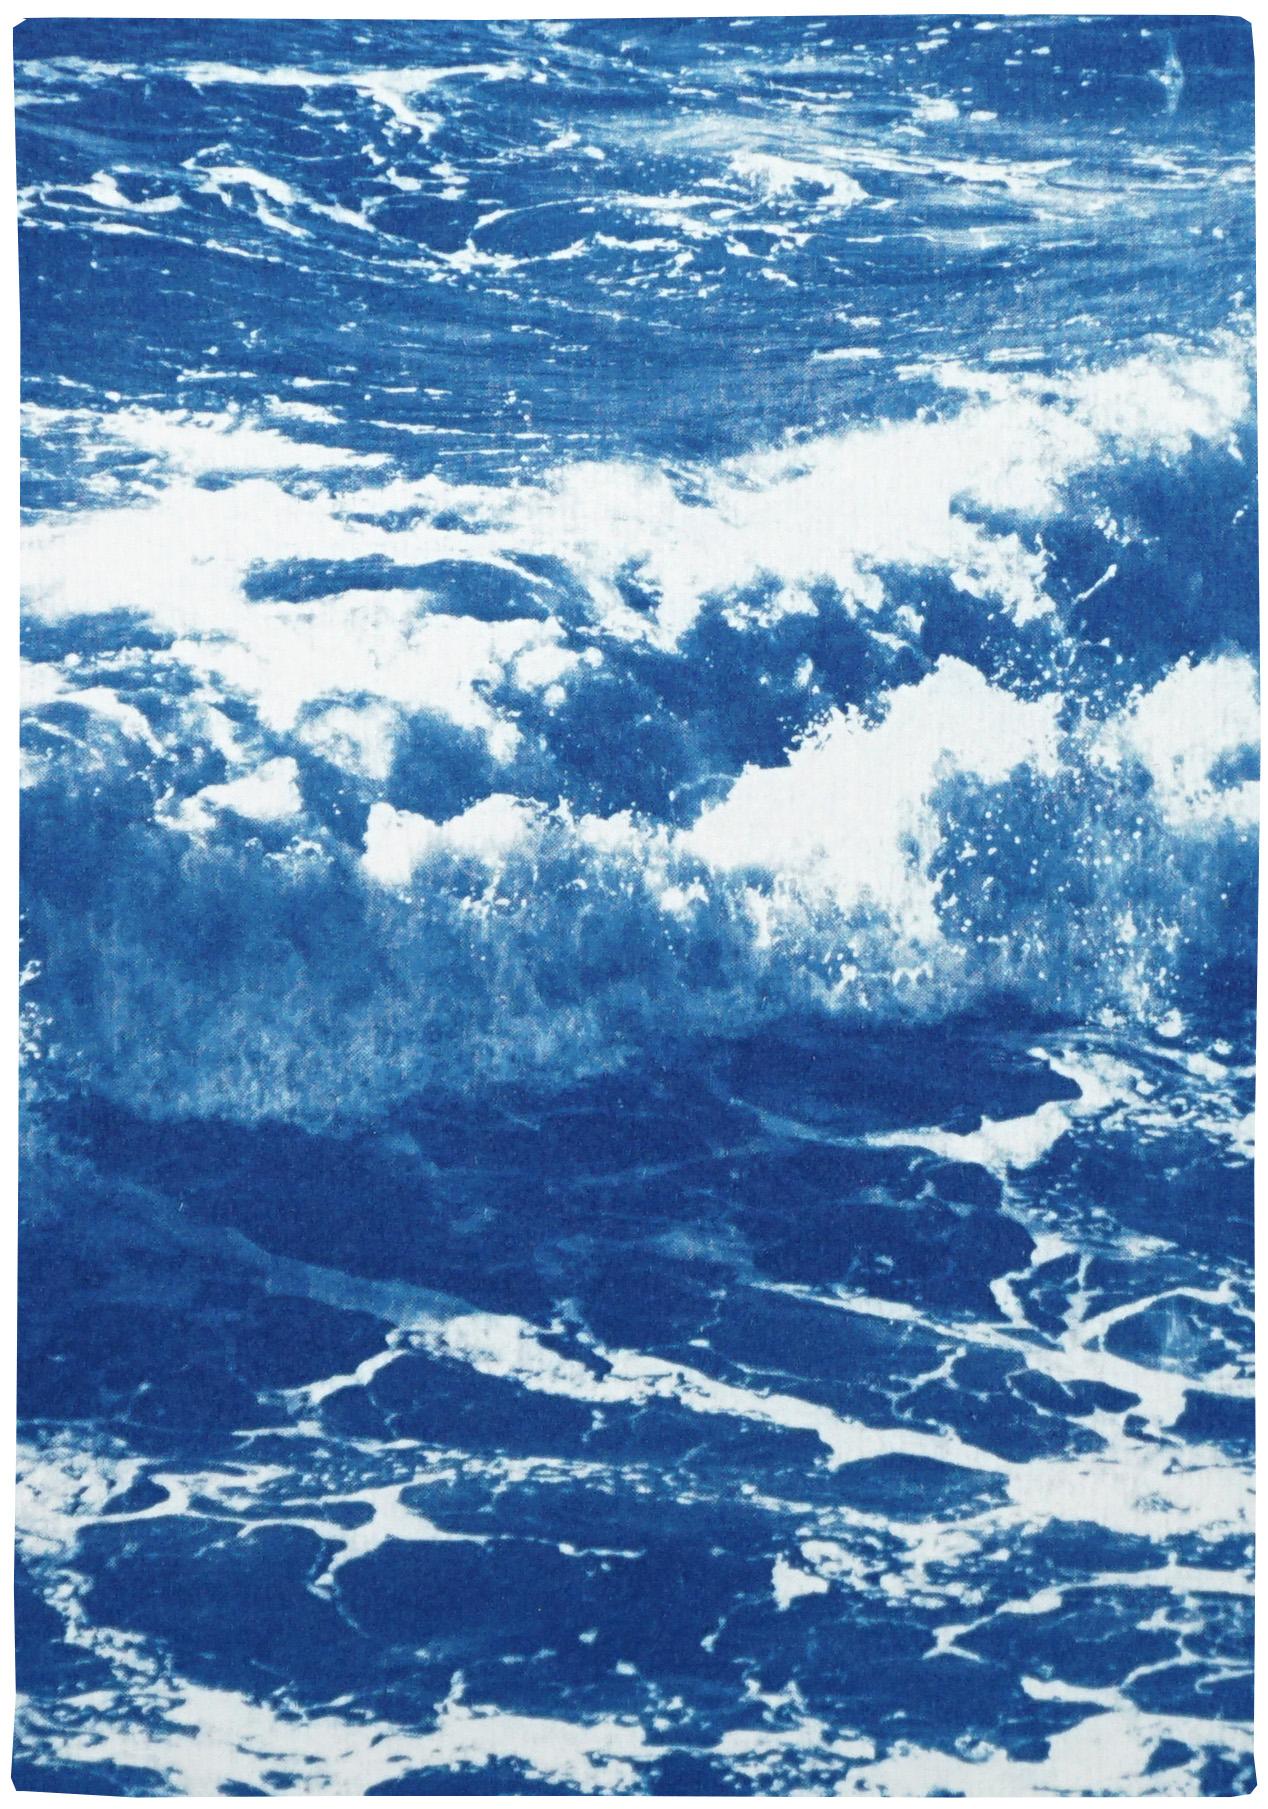 Australian Rolling Waves, Nautical Triptych of Vigorous Coast, Large Seascape - Blue Abstract Print by Kind of Cyan